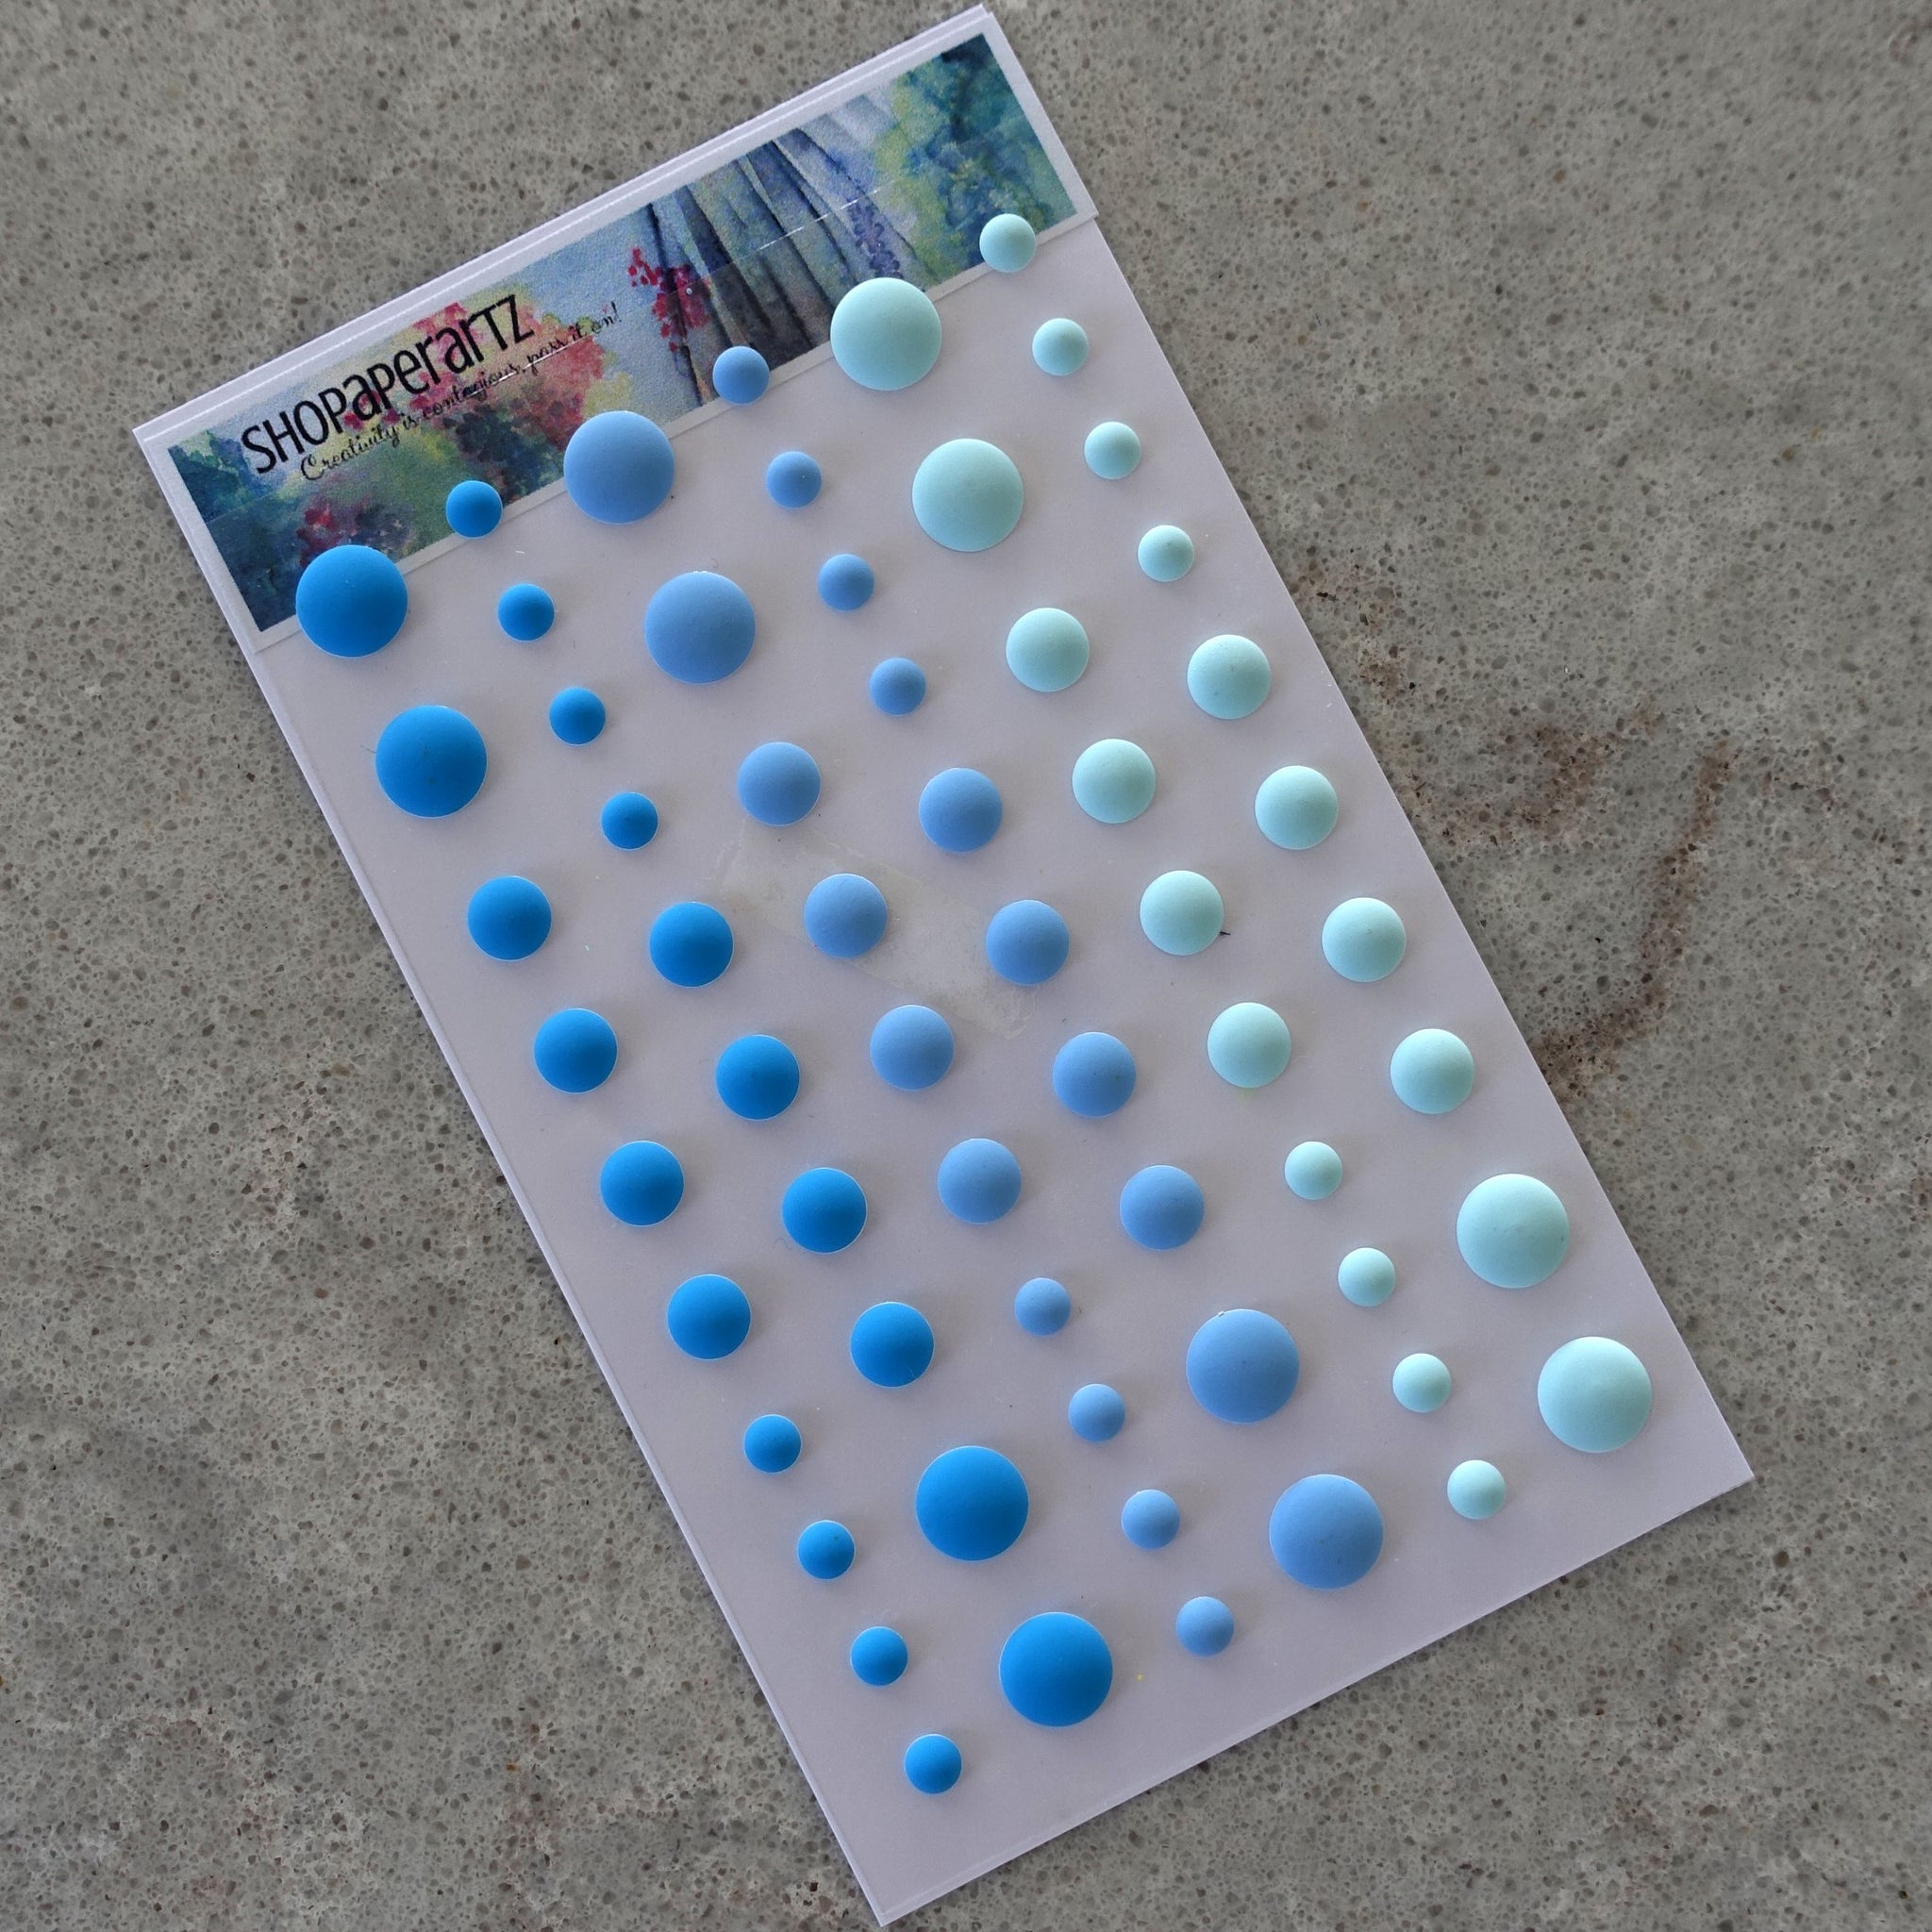 ENAMEL DOTS MATTE SHADES OF BLUE EMBELLISHMENTS ACCENTS SELF-ADHESIVE 60 PIECES CARDMAKING